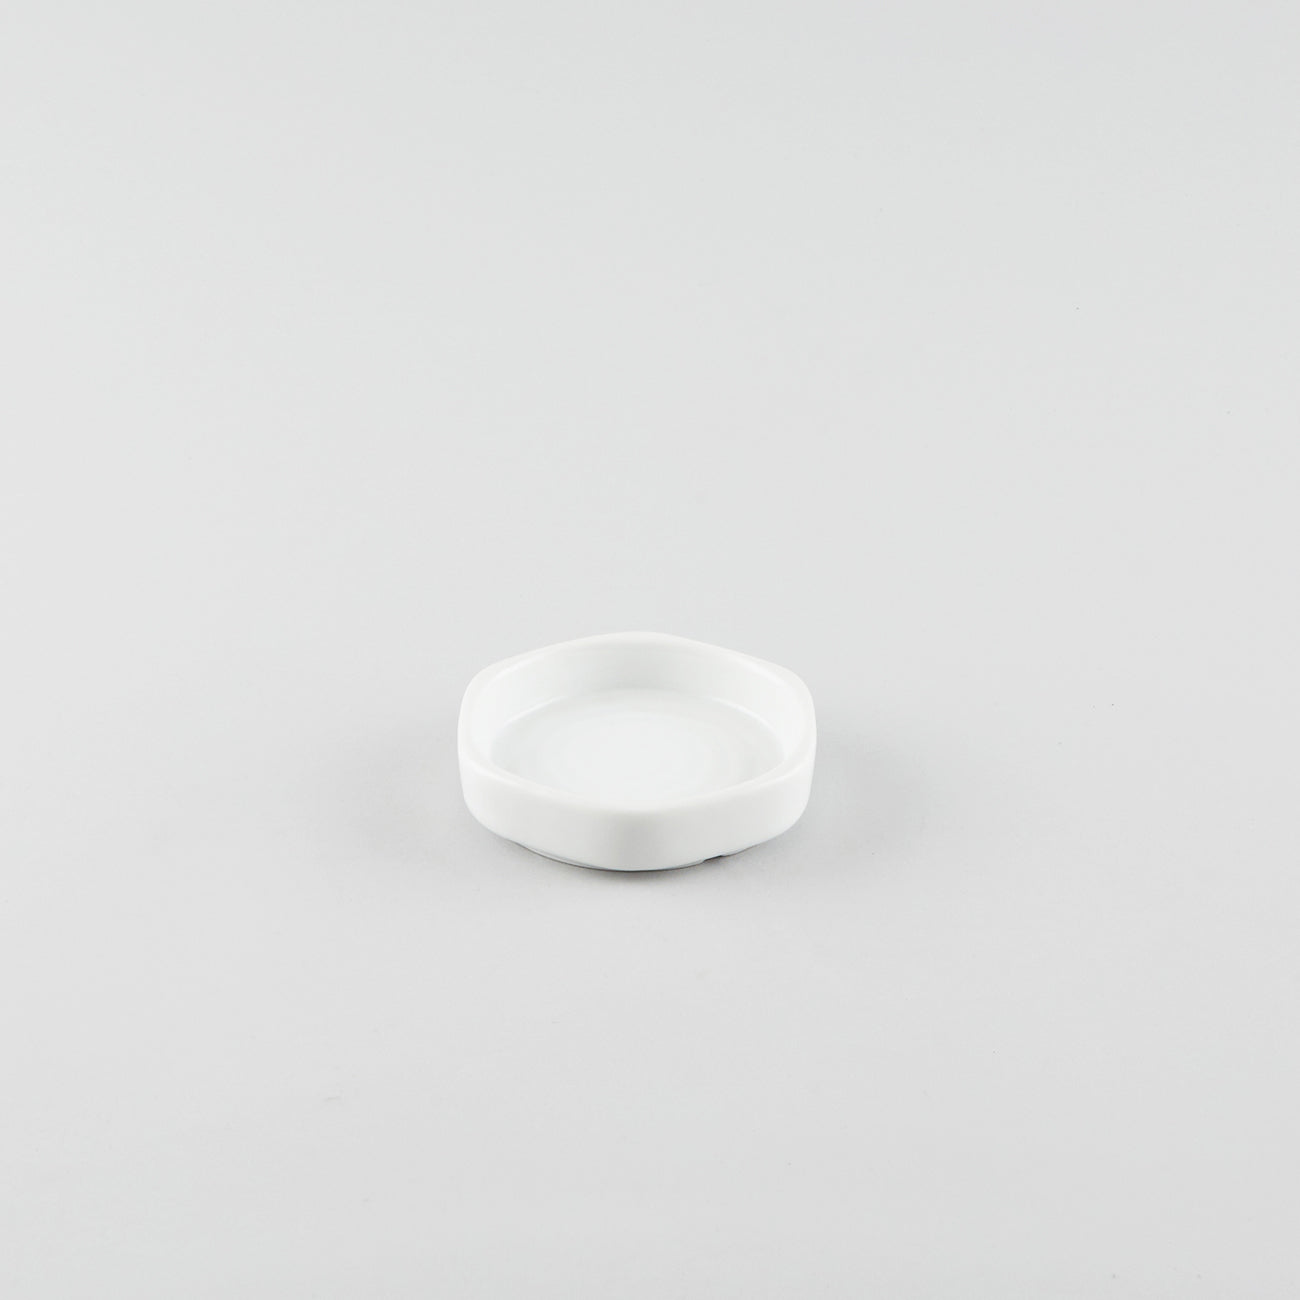 Hex Soy Sauce Dish - White